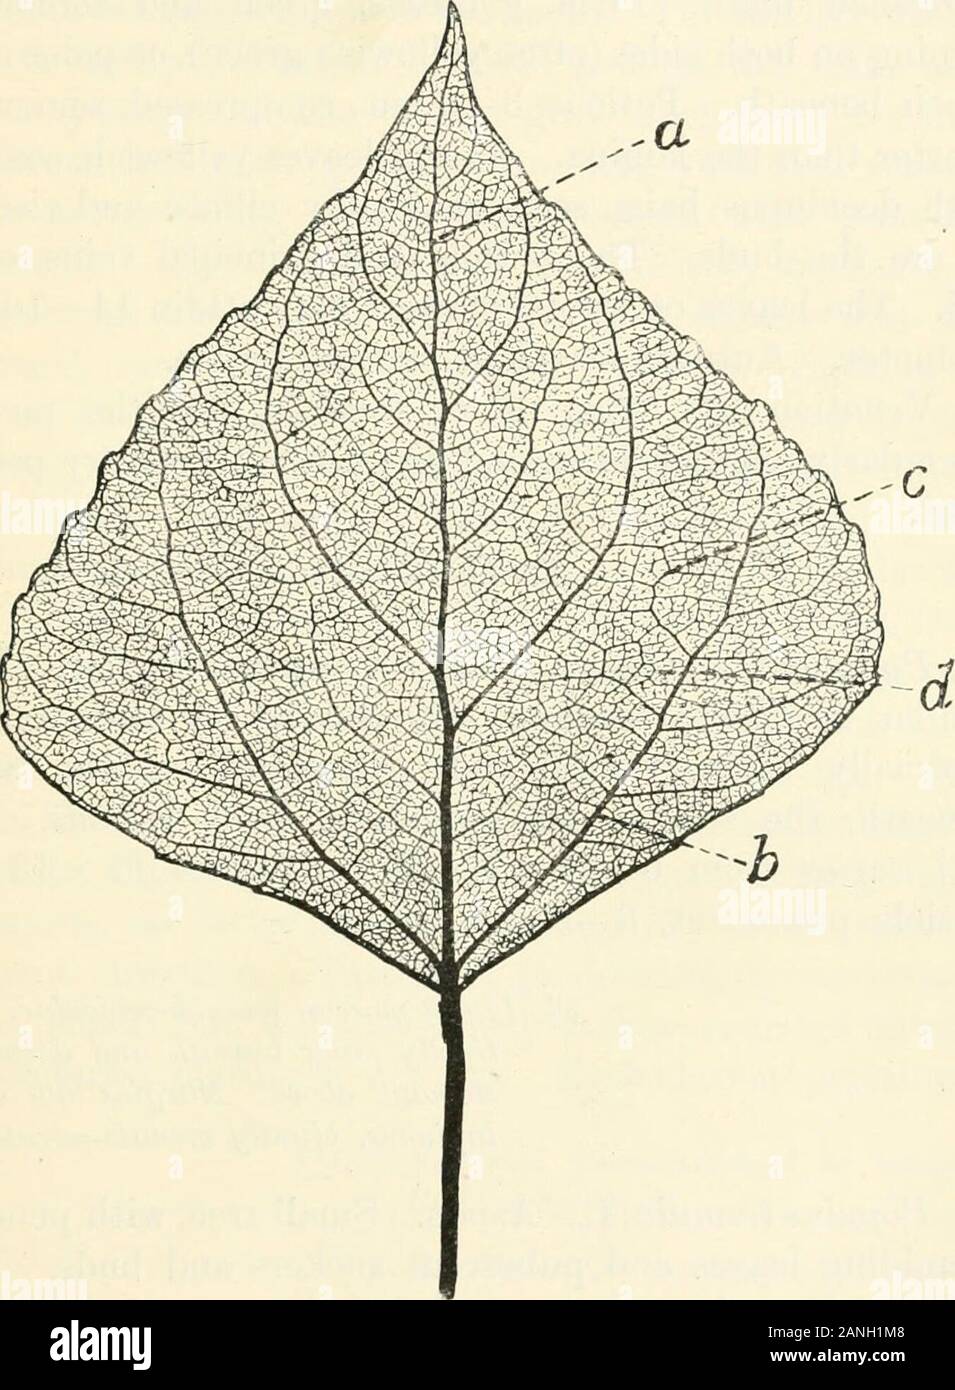 Trees; a handbook of forest-botany for the woodlands and the laboratory . Fig. 95. a Black Poplar, Populus nigra ; b Populus Canadensis, p. 263 (Sc). BLACK POPLAR 263 Populus nigra, L. Black Poplar (Figs. 95 and 96).Large tree, spreading or (var. pyramidalis) fastigiate, withloosely hung foliage. Leaves triangular- or sub-orbicular-. Fig. 96. Black Poplar, Populus nigra. Venation pinnate with pseudo-palmate base. a midrib ; b basal secondary; c tertiaries ; d network ofterminals, &c, p. 263 (Ett). cordate, to deltoid, or broad-ovate, tapering acuminate;often sub-rhomboid and broader than long, Stock Photo